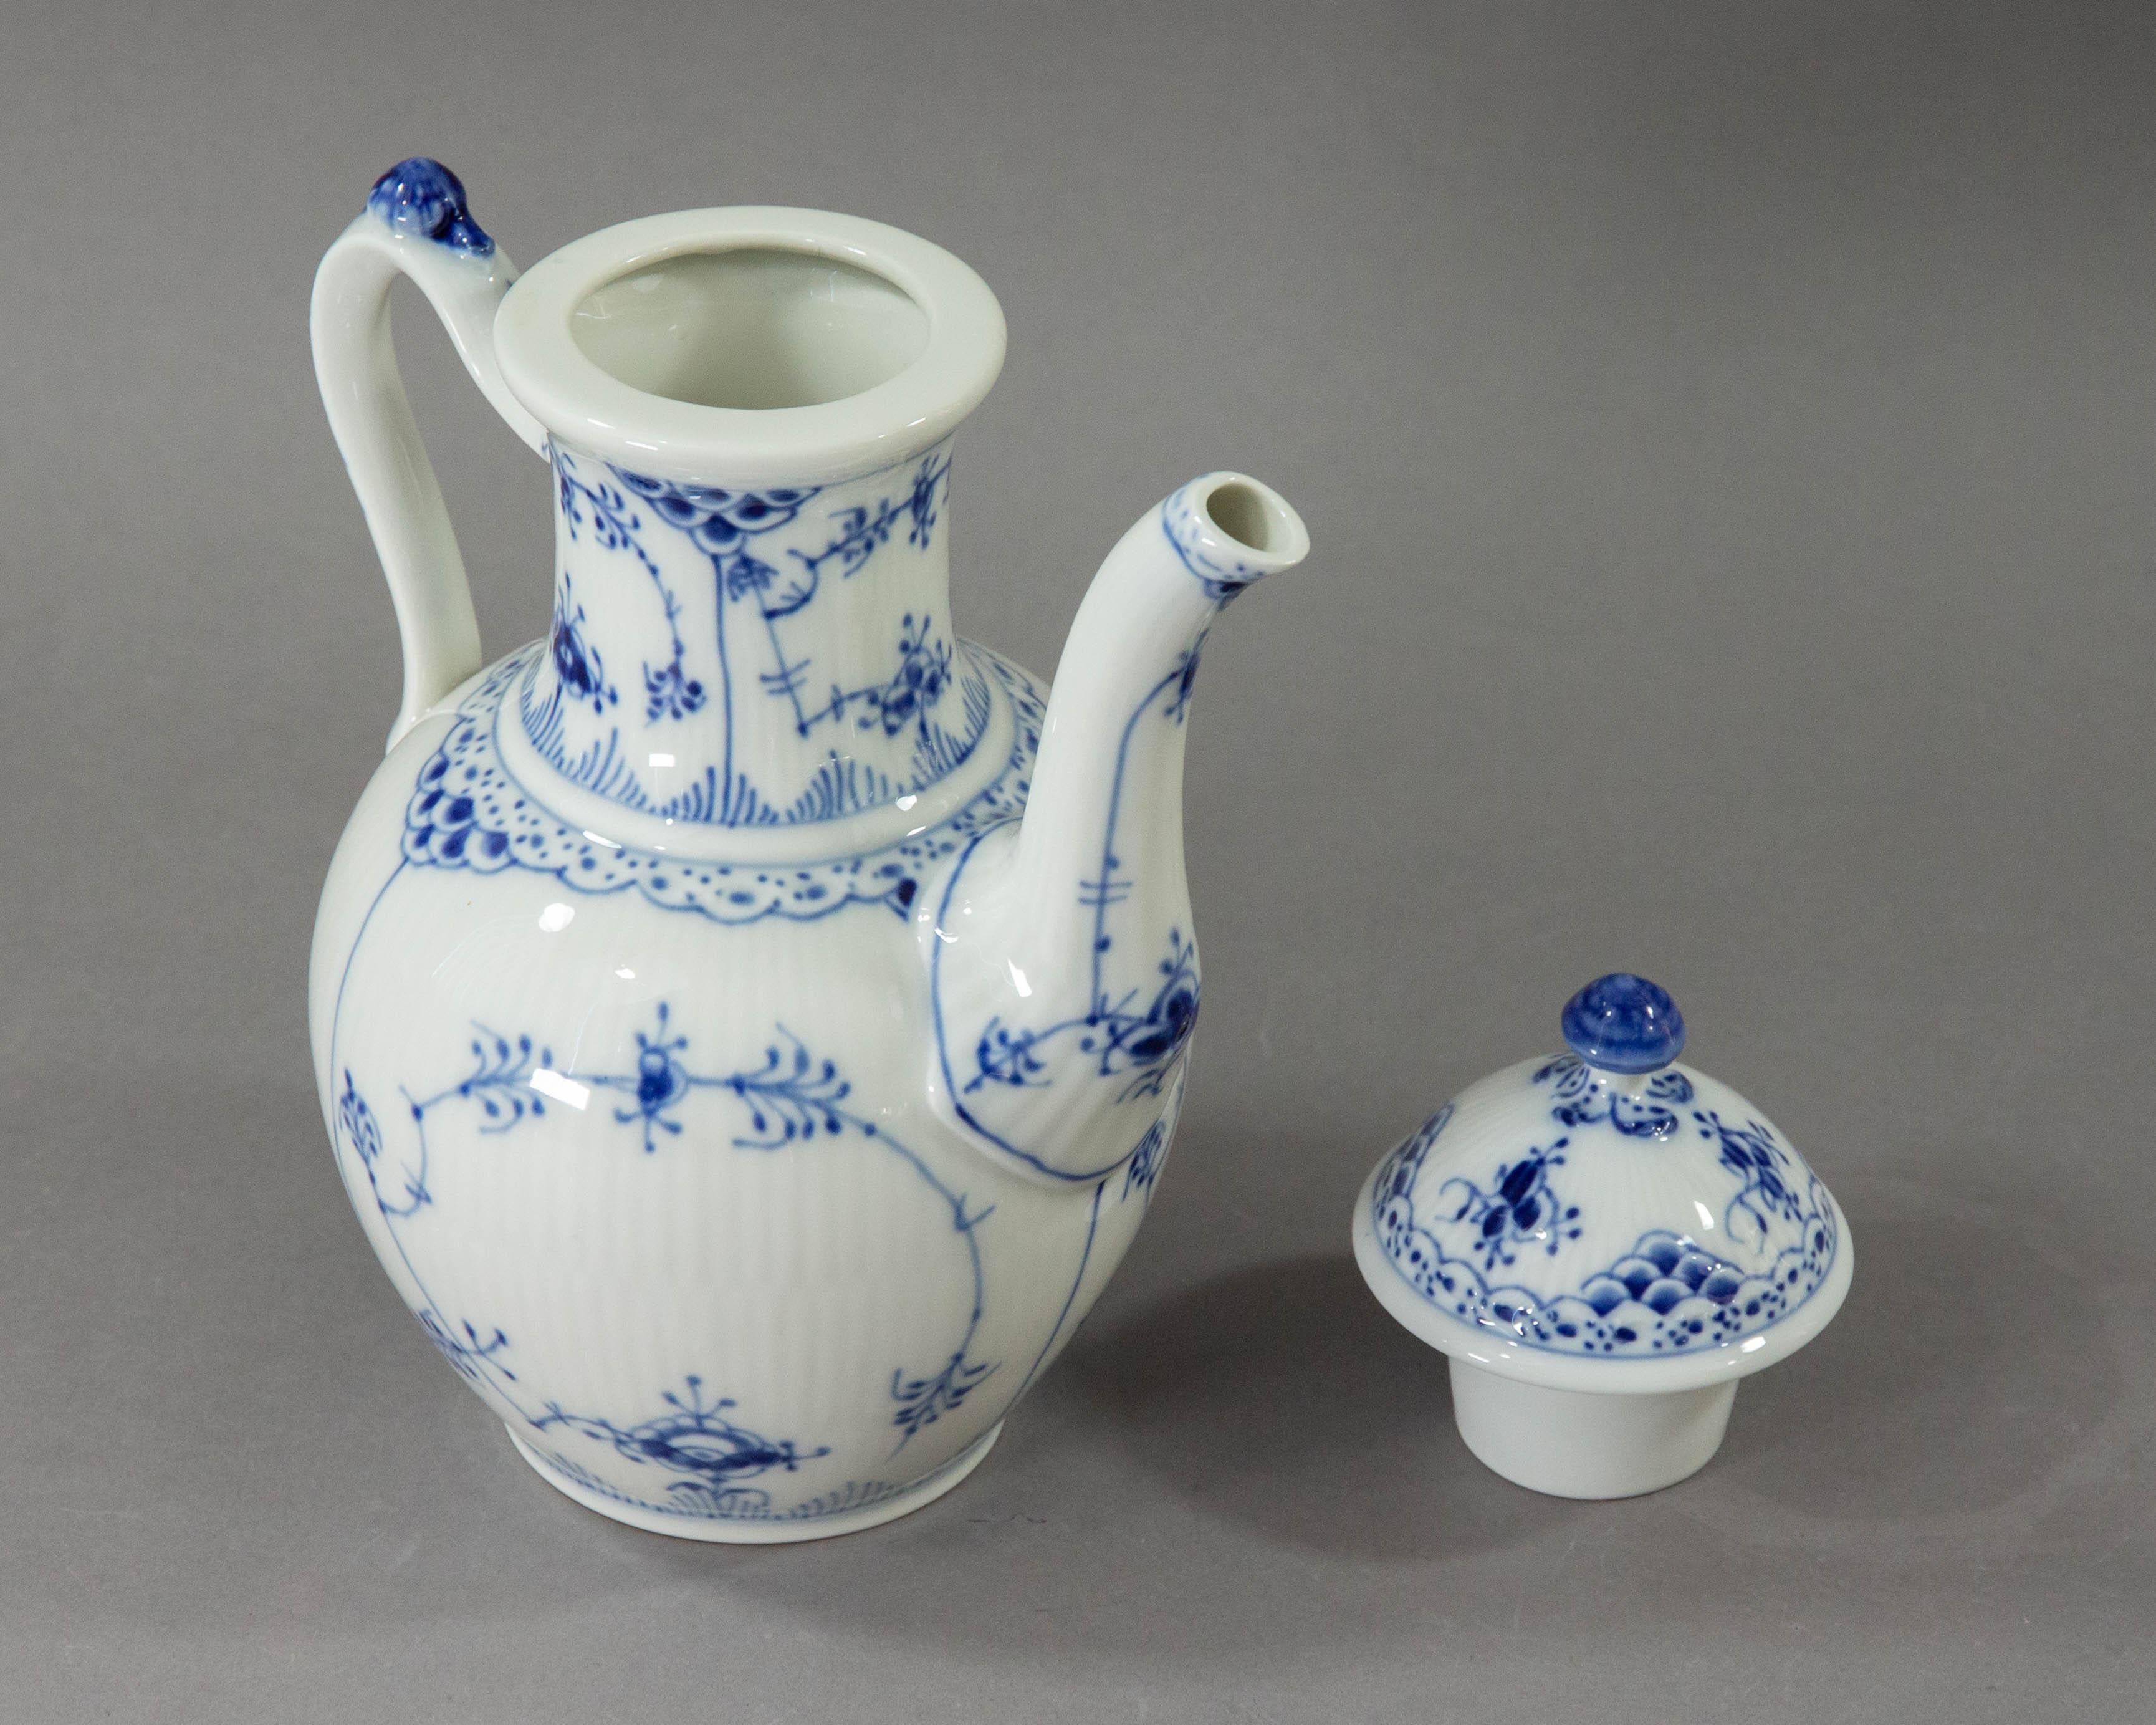 A beautiful coffee pot made by Royal Copenhagen in Denmark decorated with the blue fluted pattern in half lace.

The Blue Fluted pattern, also known as Musselmalet was the first pattern Royal Copenhagen produced. It was first made in 1775. The